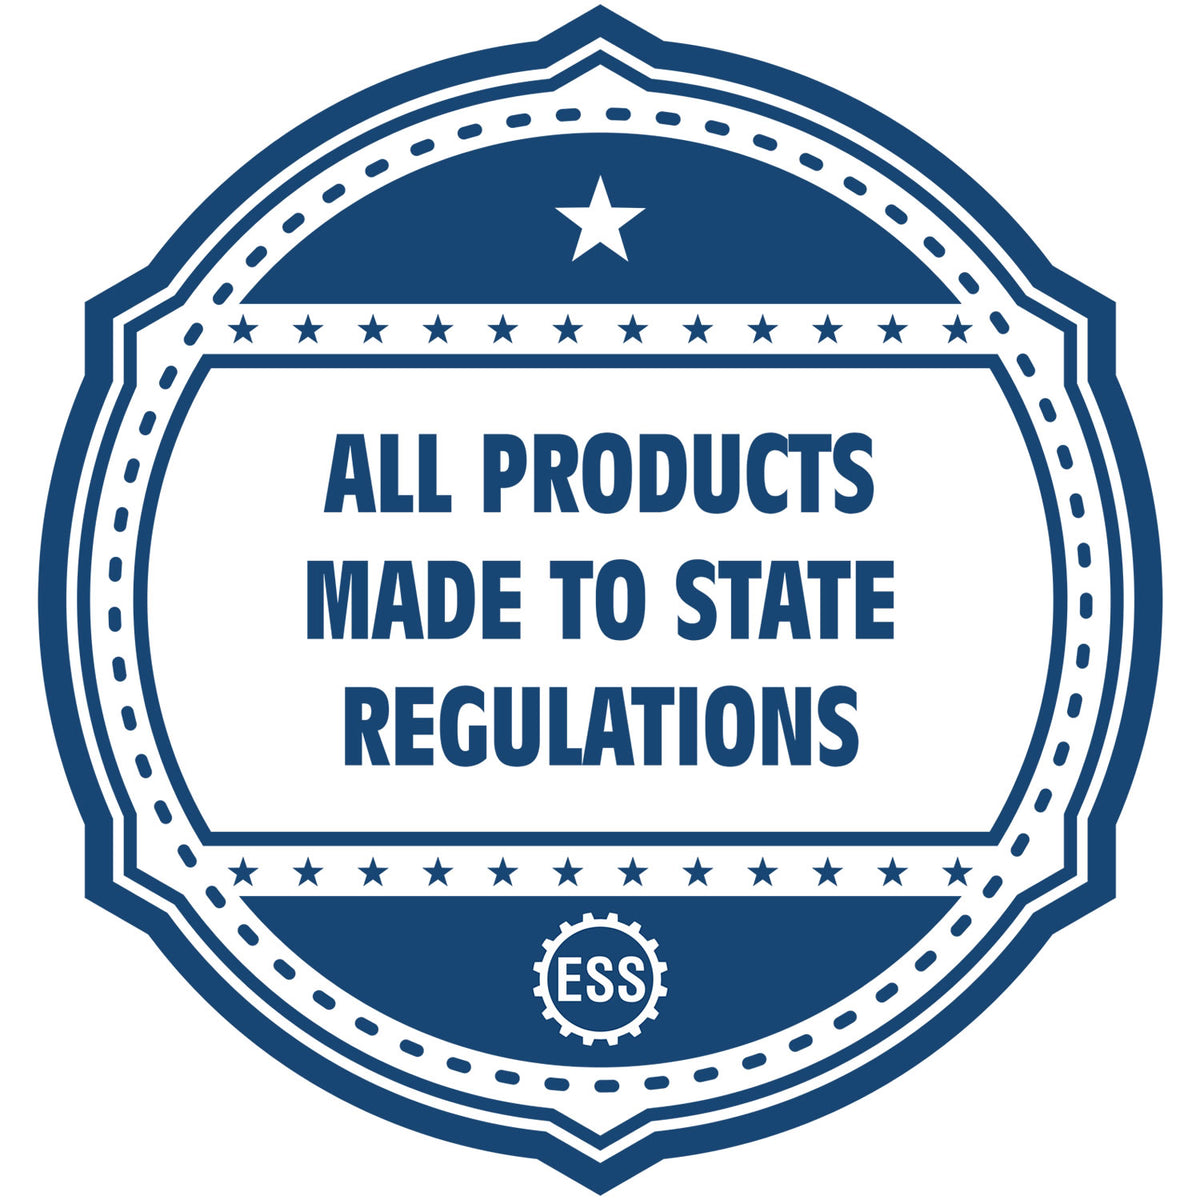 An icon or badge element for the PSI California Notary Stamp showing that this product is made in compliance with state regulations.